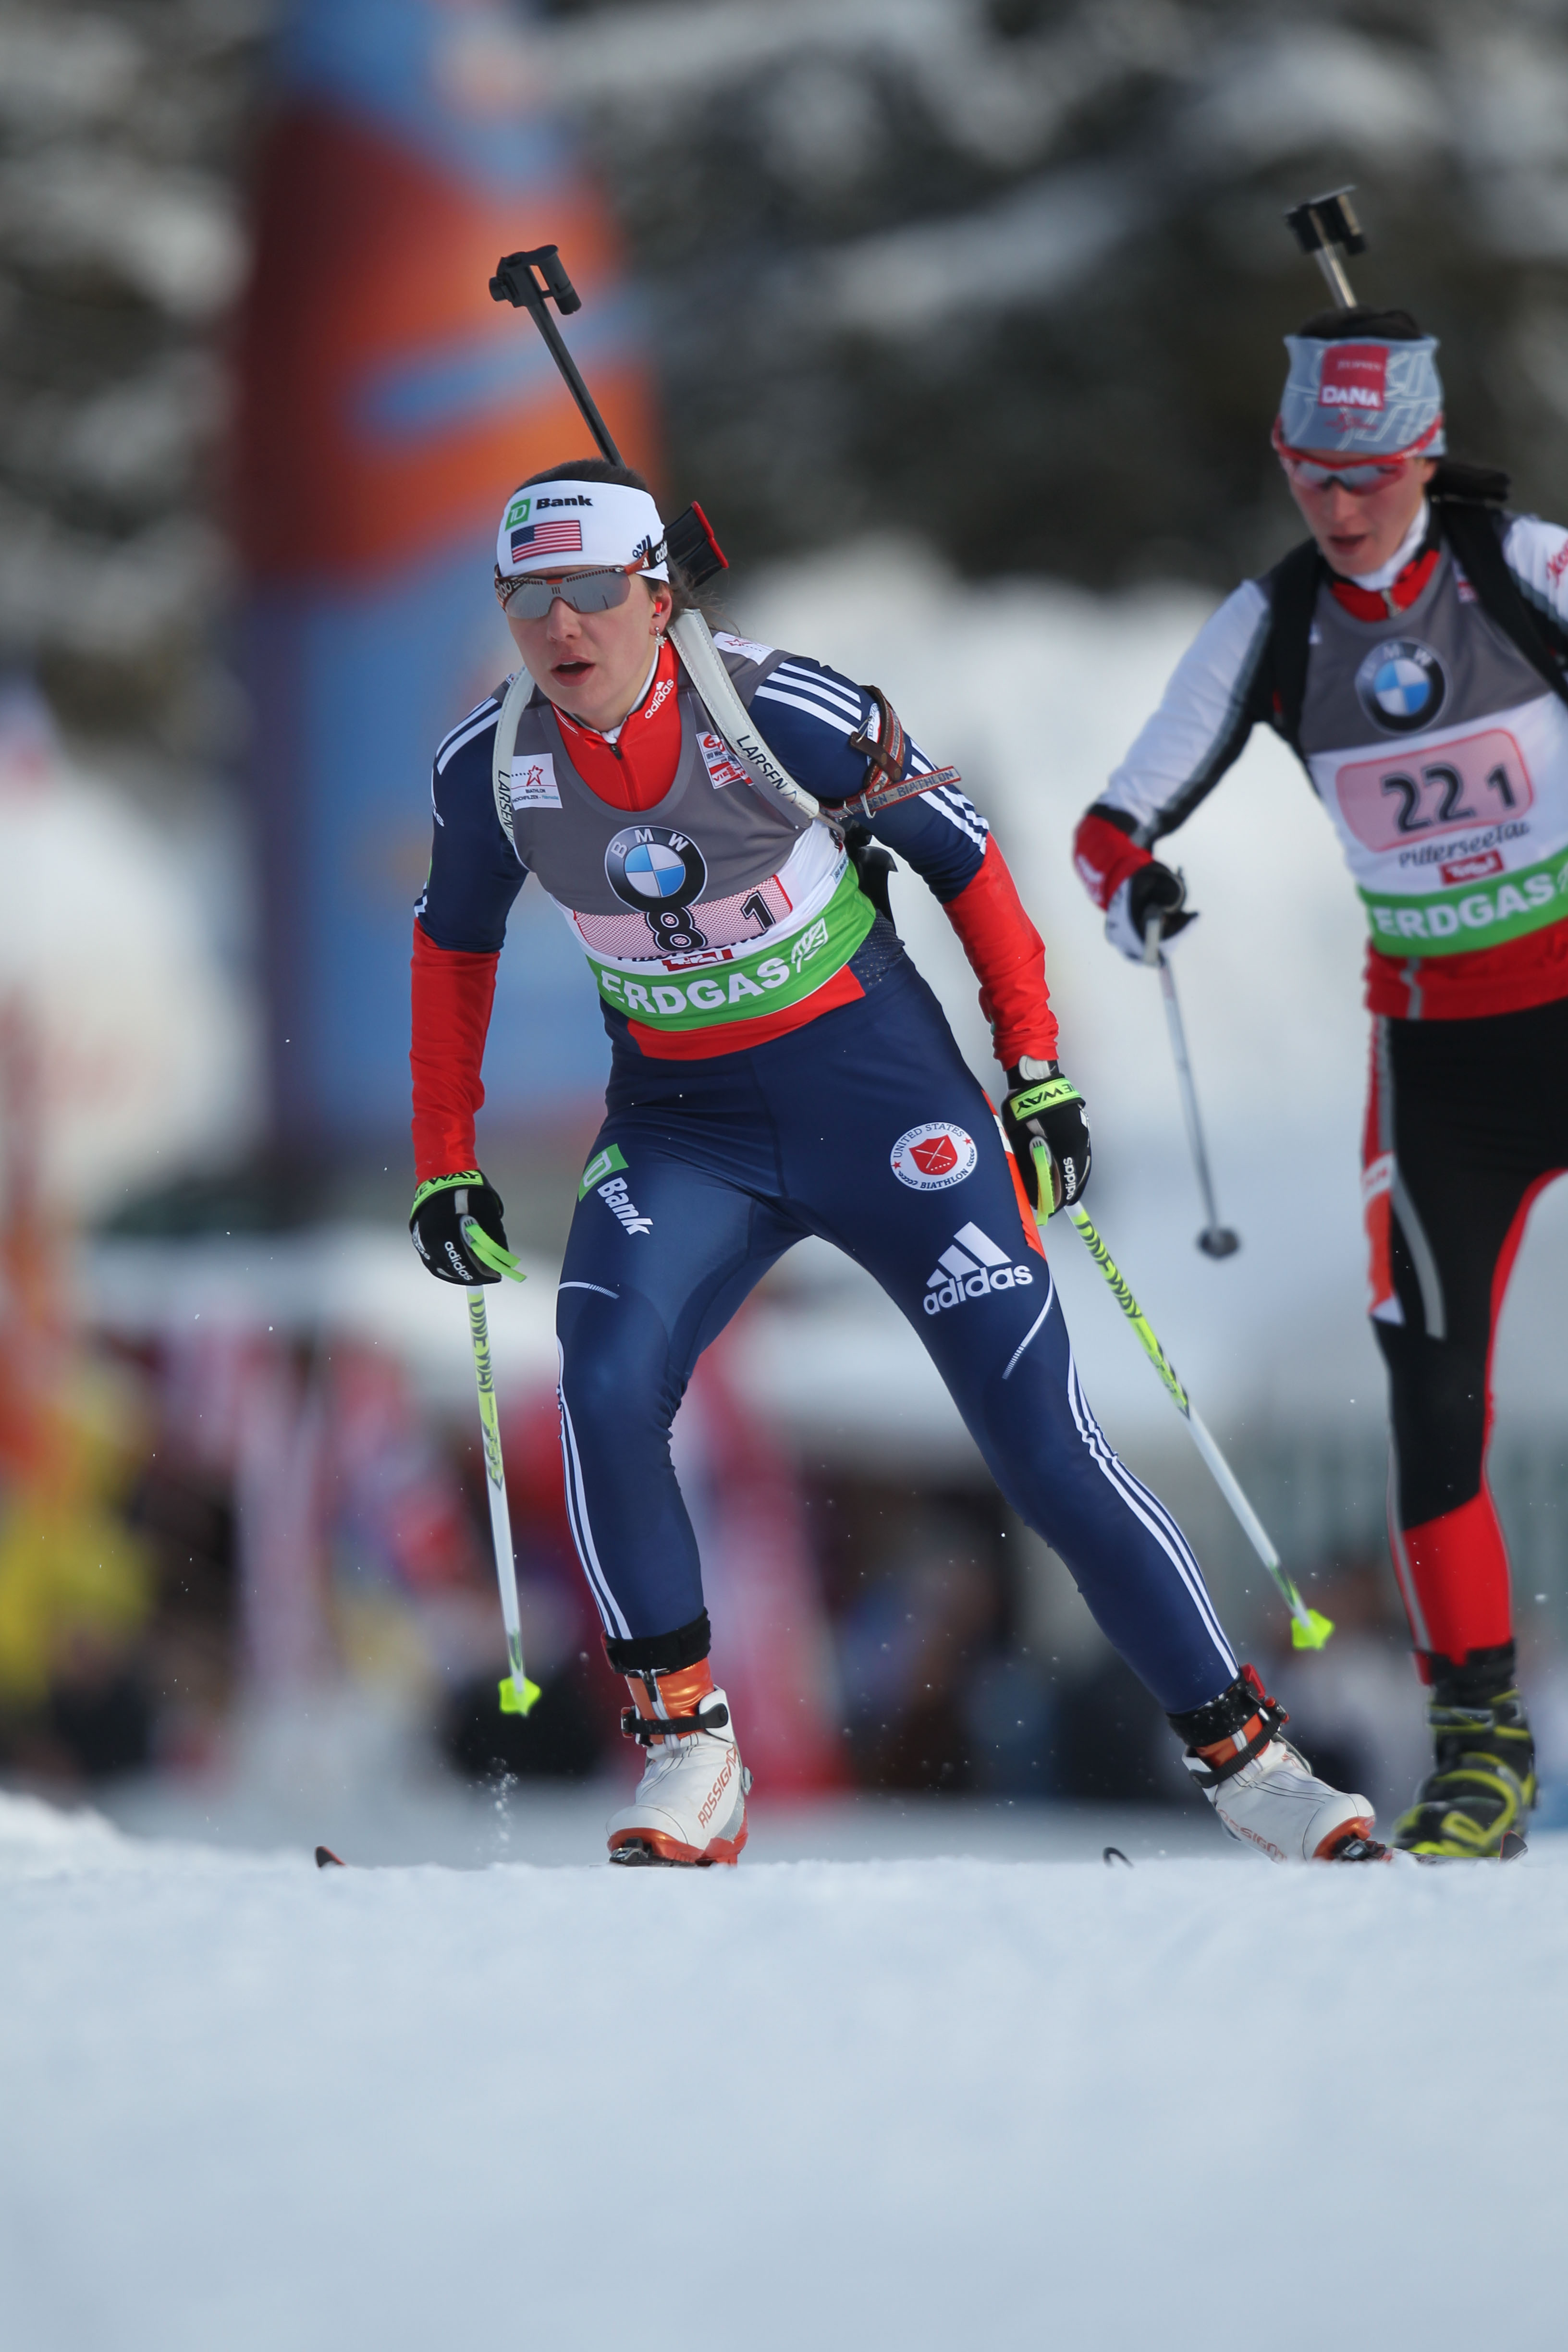 UPDATED – Notes and Quotes from the Hochfilzen IBU World Cup Weekend